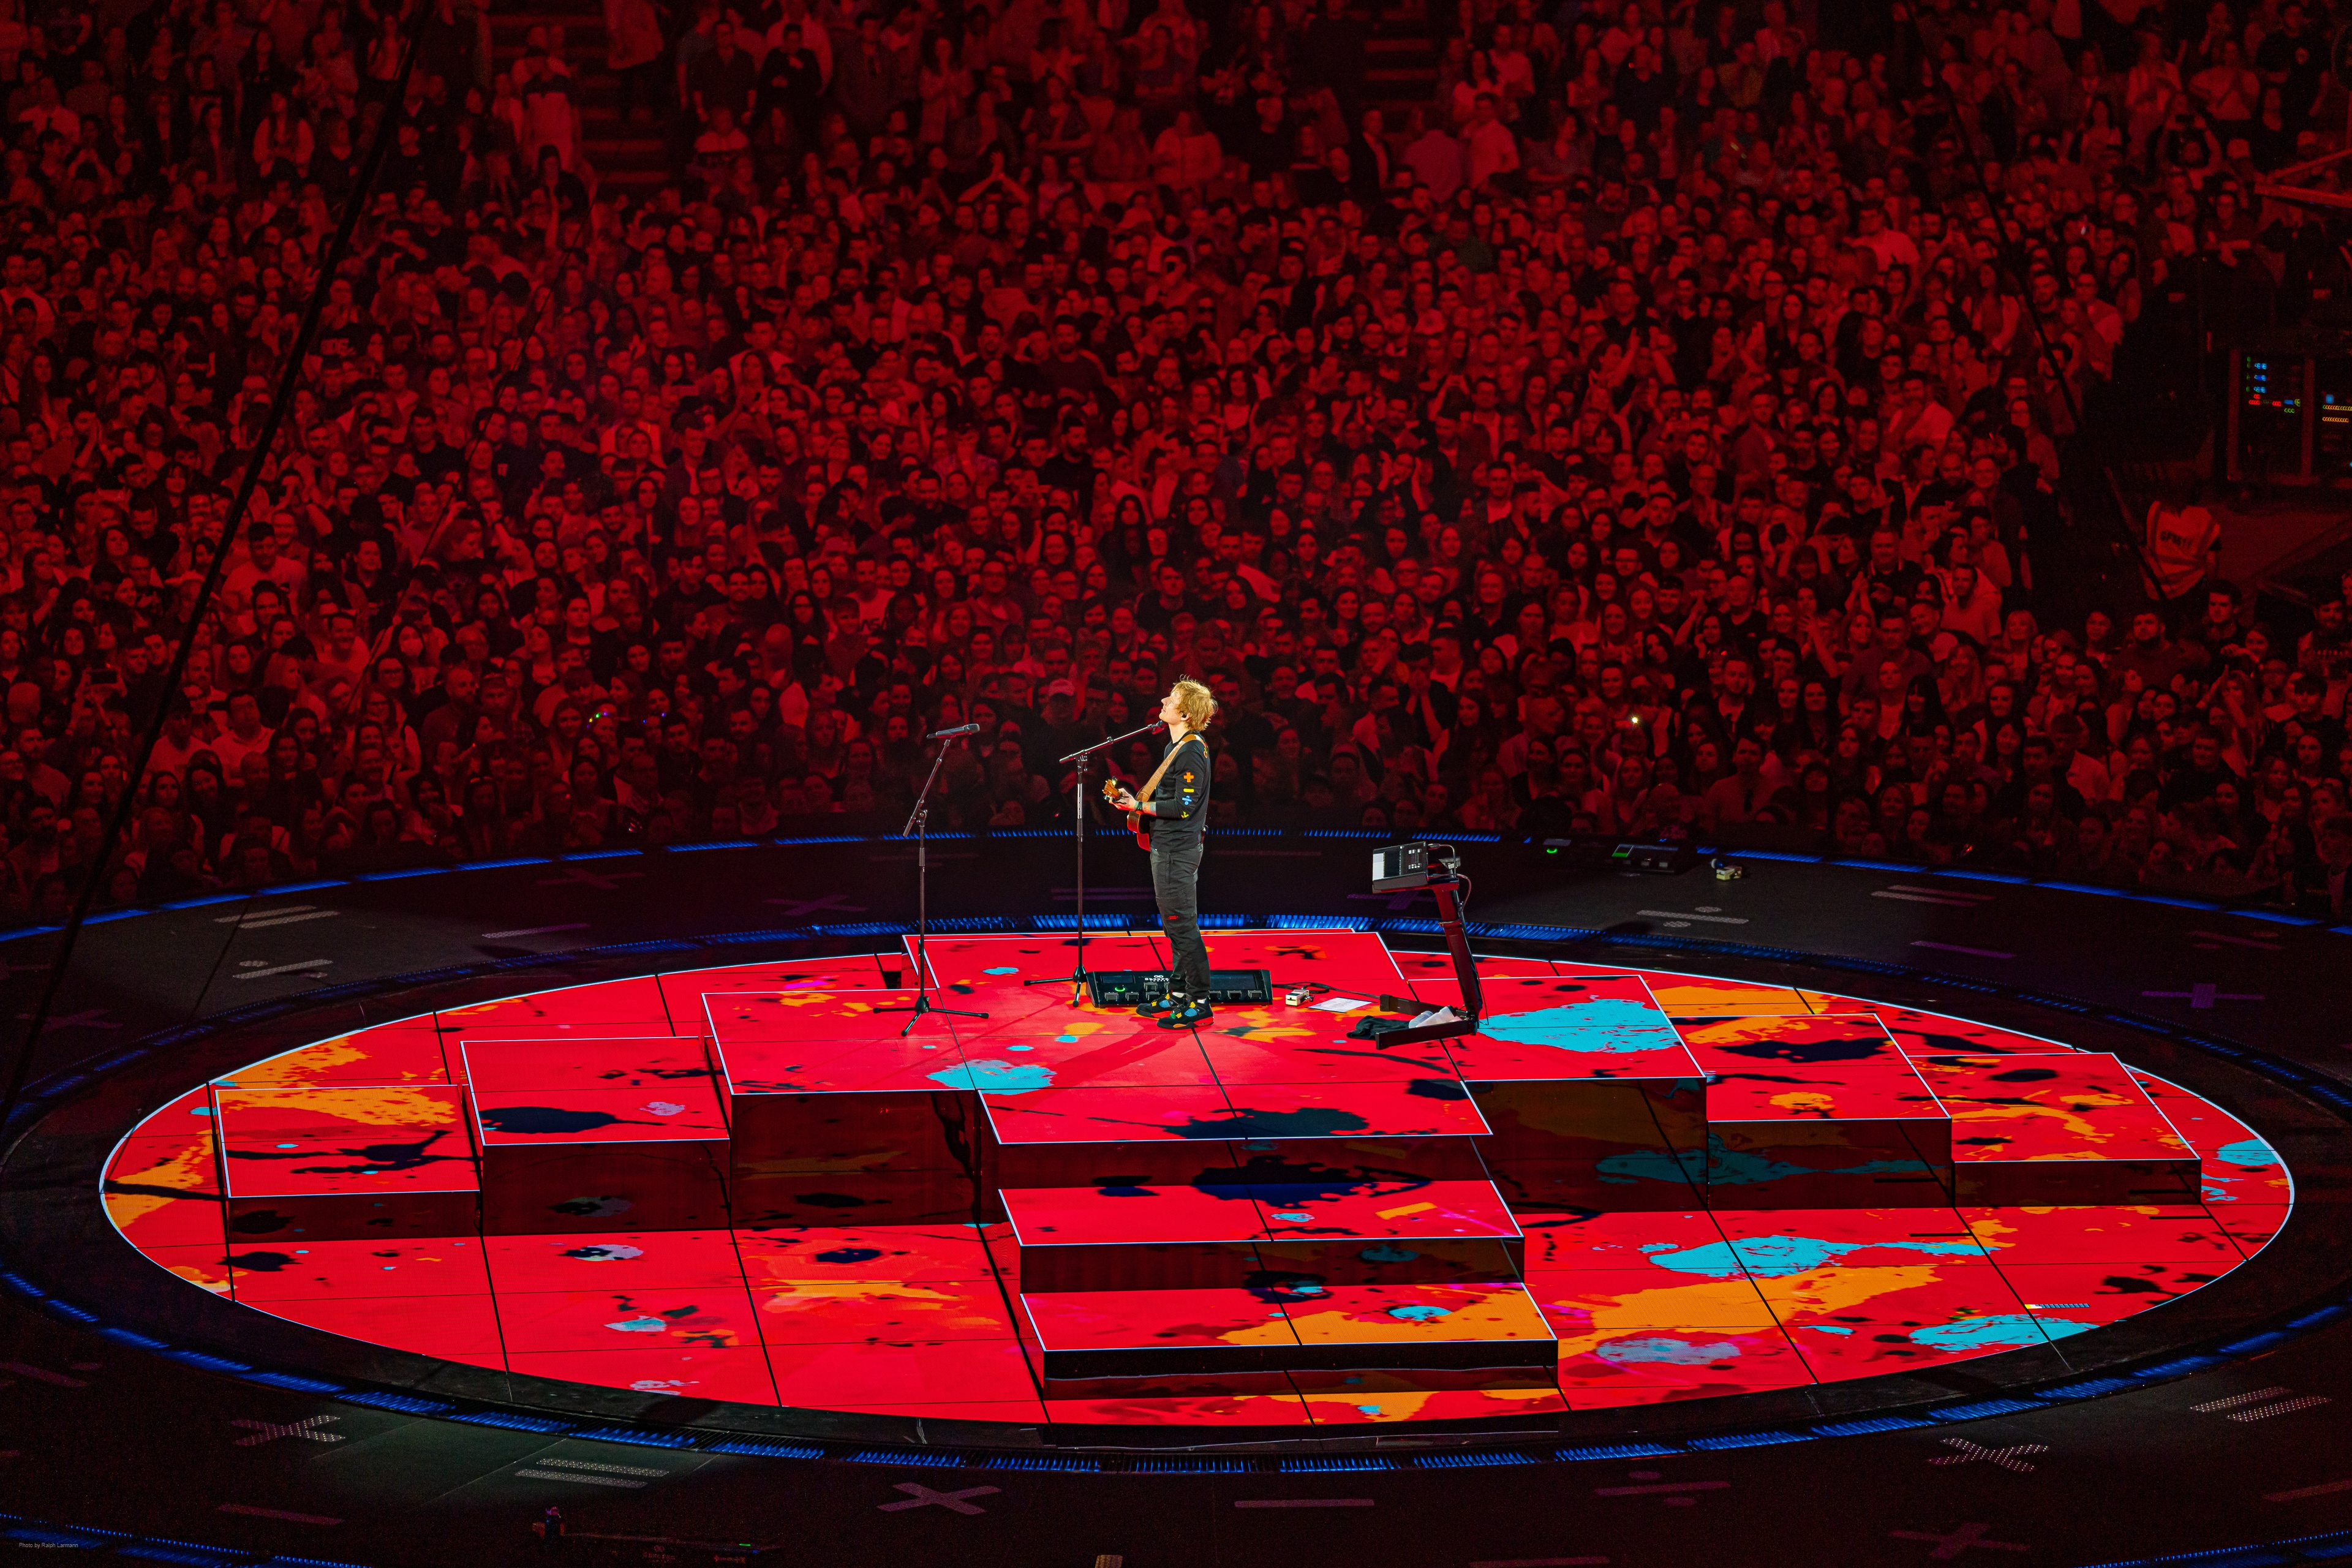 Ed Sheeran playing guitar and singing in center of round LED stage lit up red